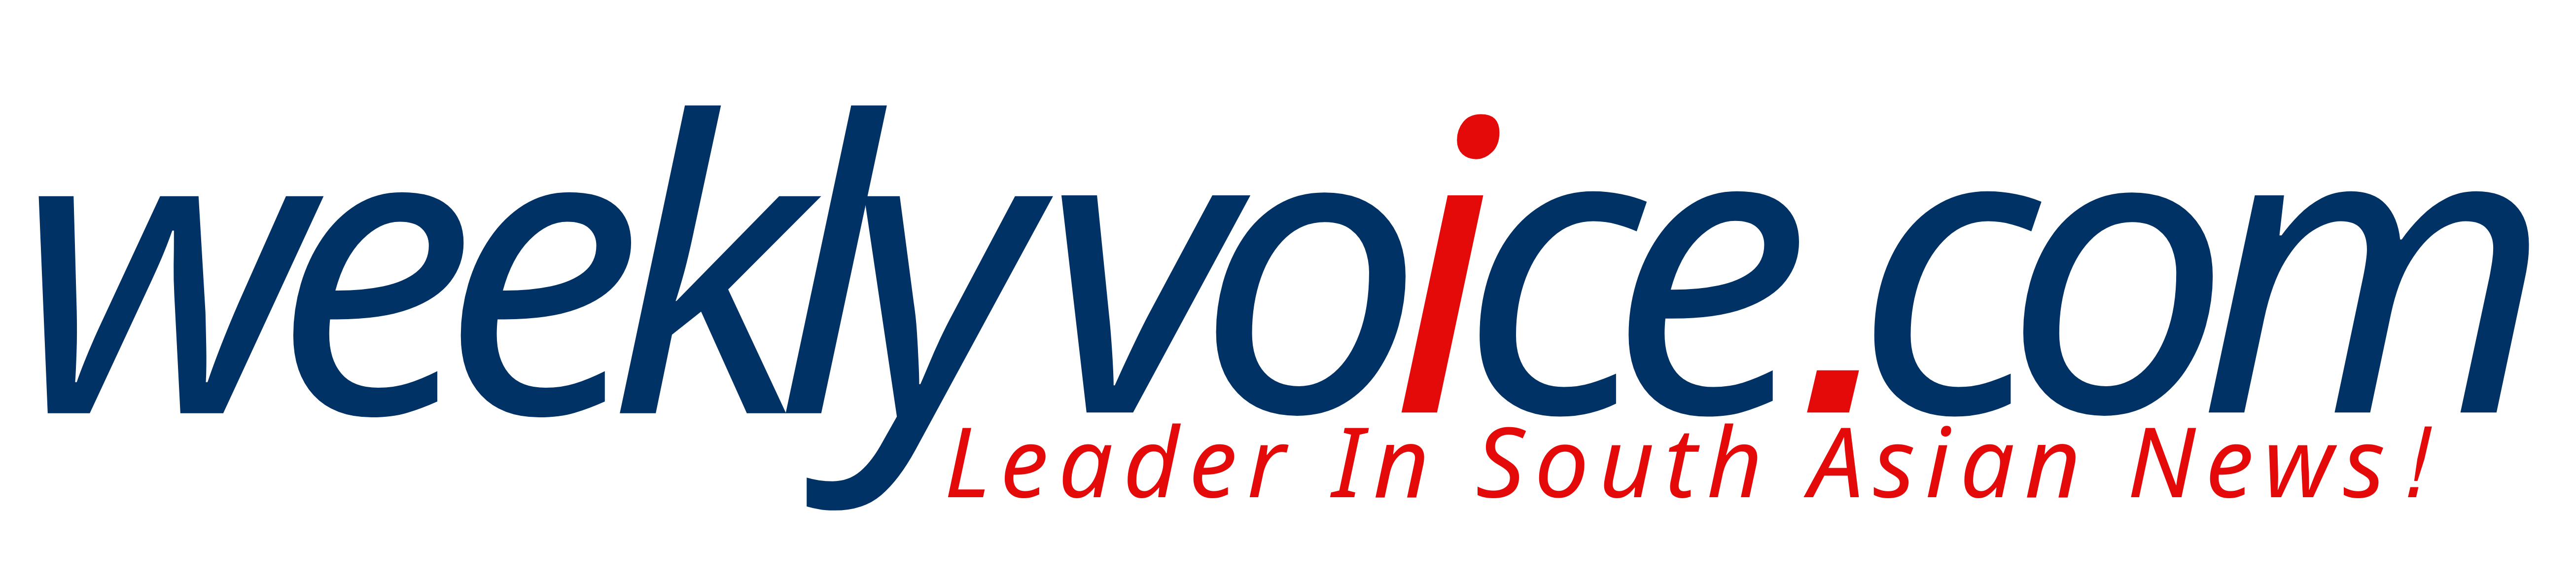 Weekly Voice